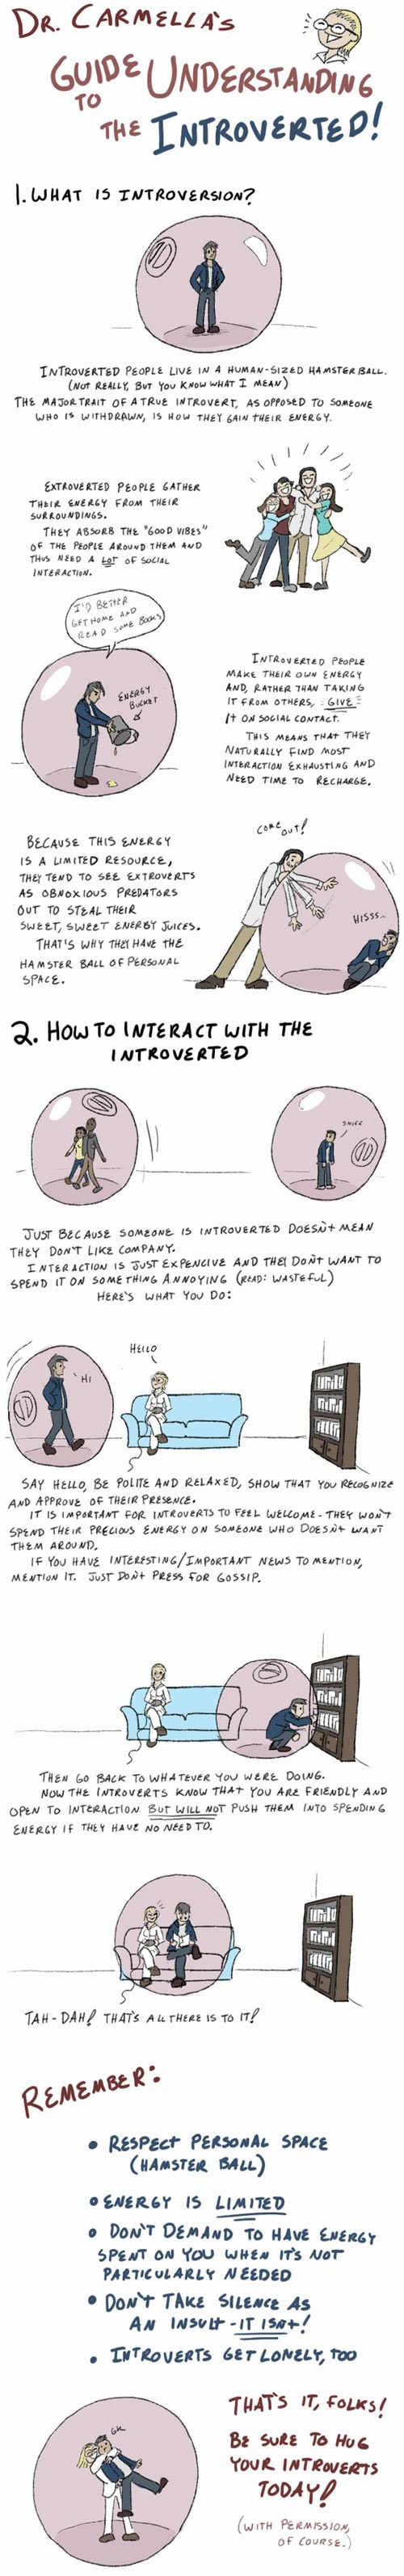 A Guide to Understanding Introverts